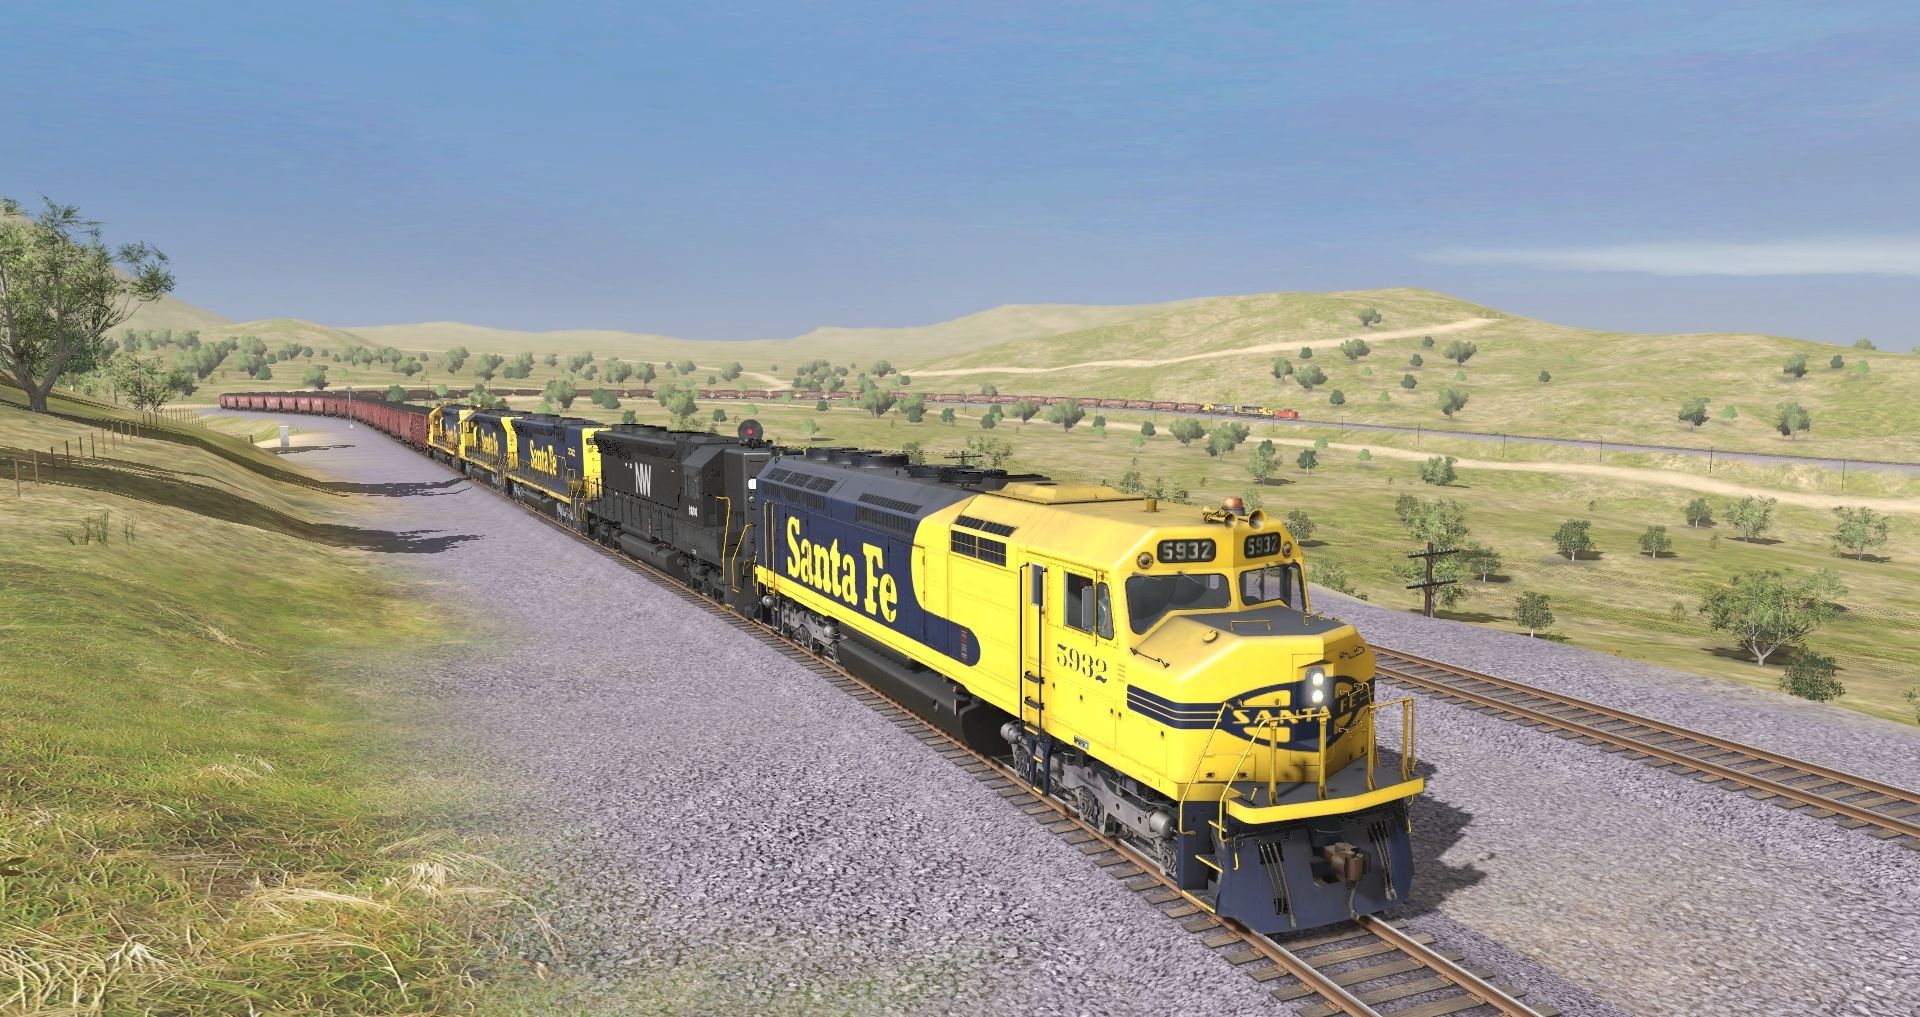 ATSF-5932-East-just-past-the-signals-at-Allard-on-the-famed-Tehachapi-Pass..jpg